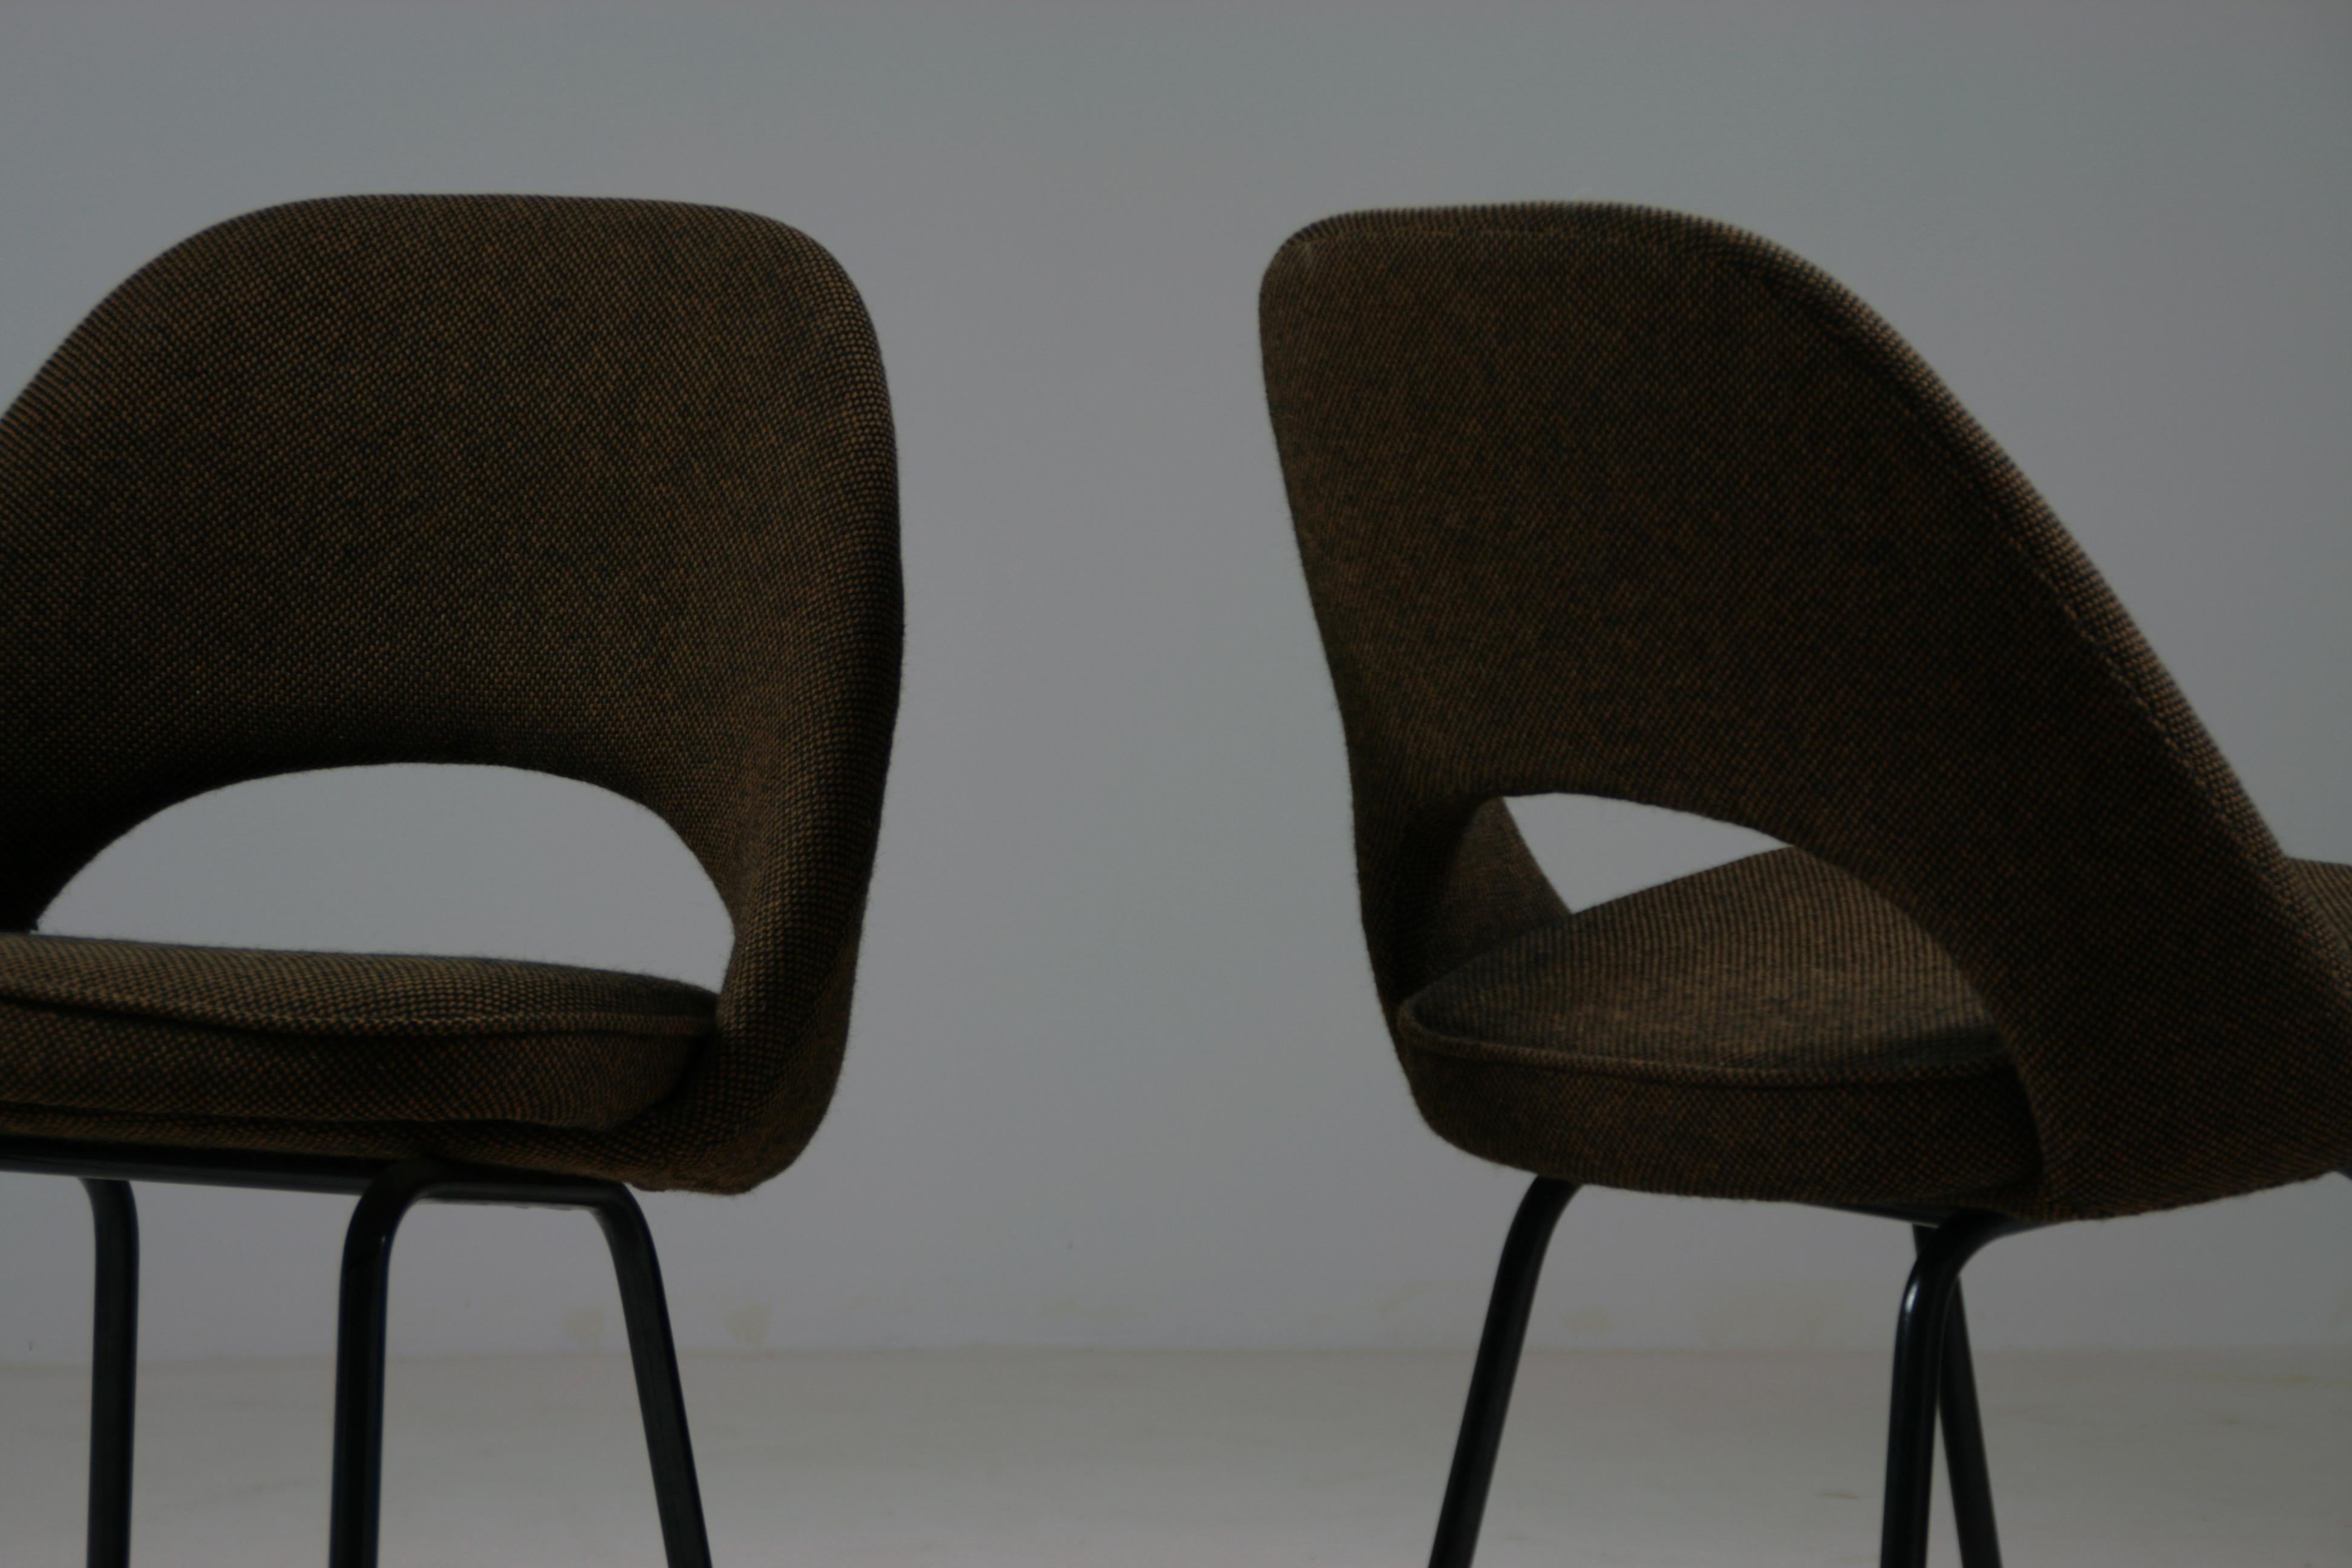 Upholstery Pair of Conference Chairs by Eero Saarinen, Knoll International, 1960 For Sale